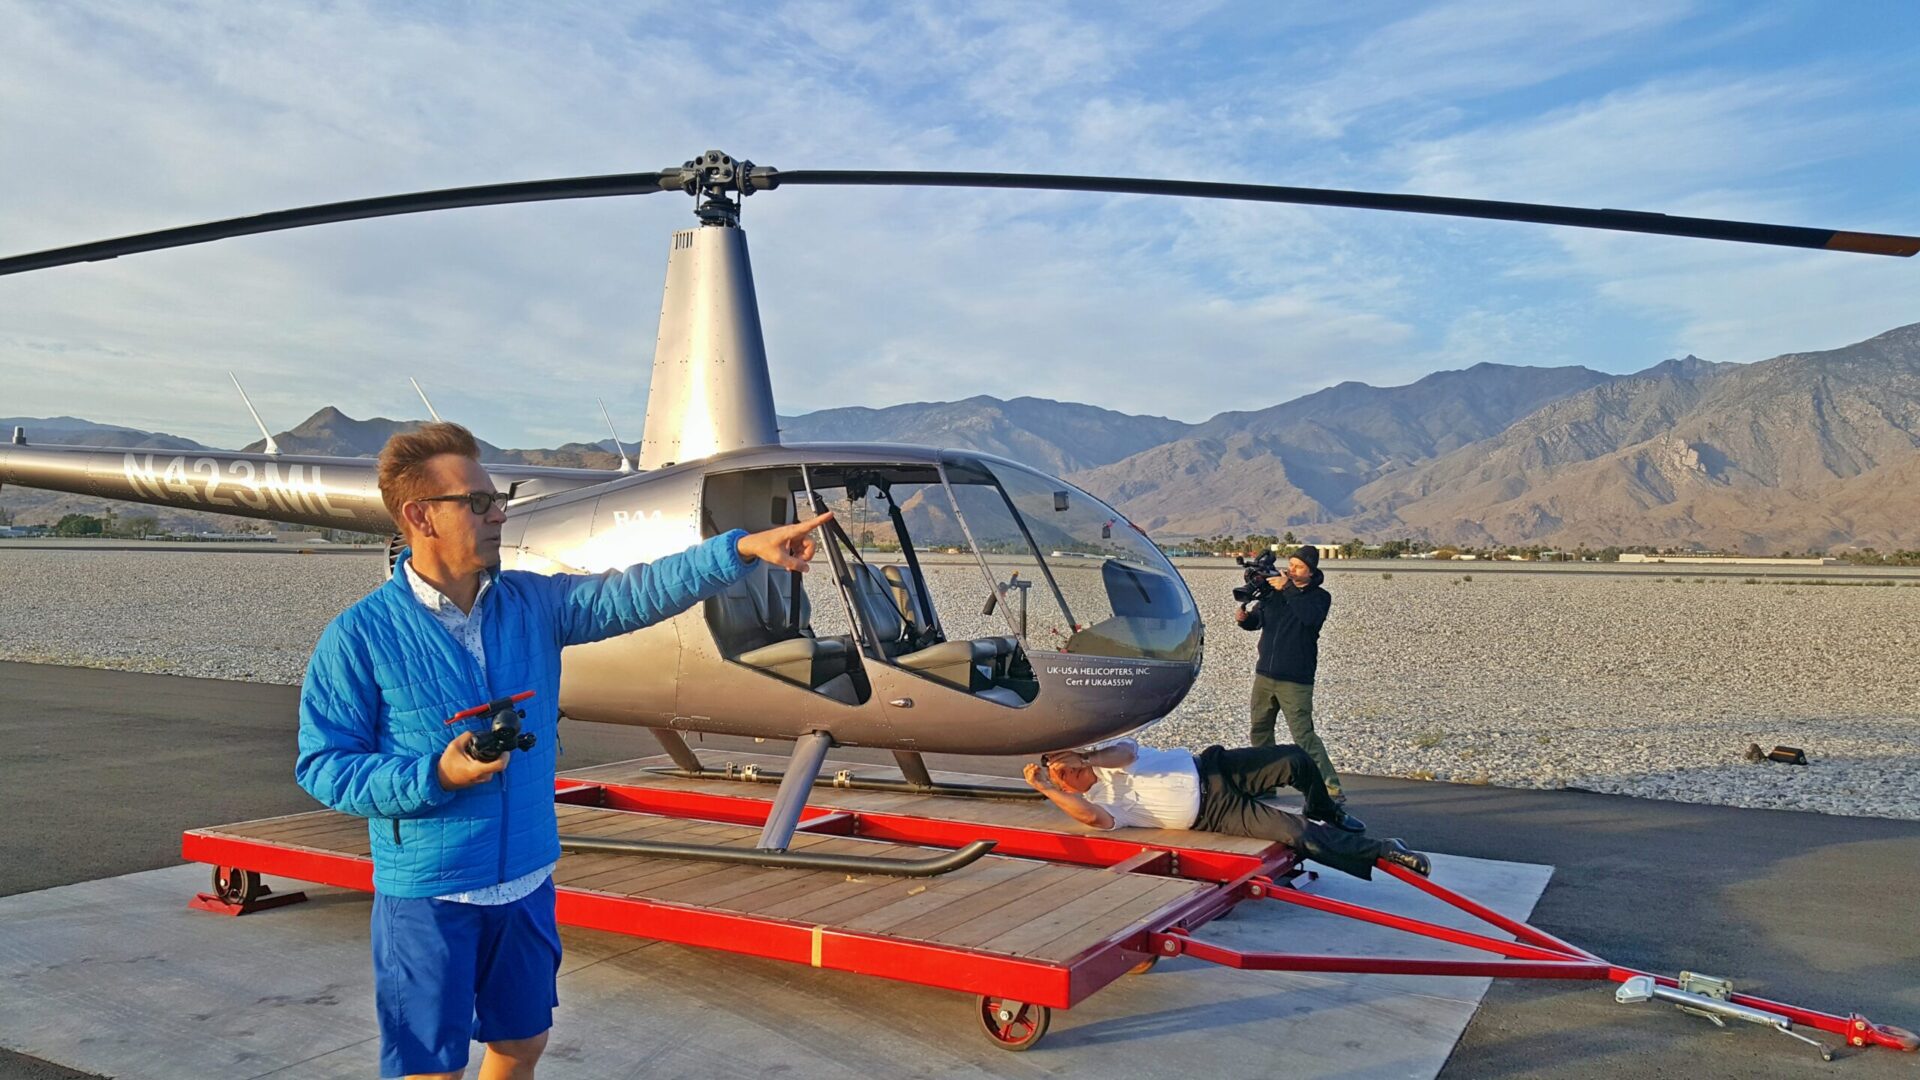 Film crew preparing shot with helicopter